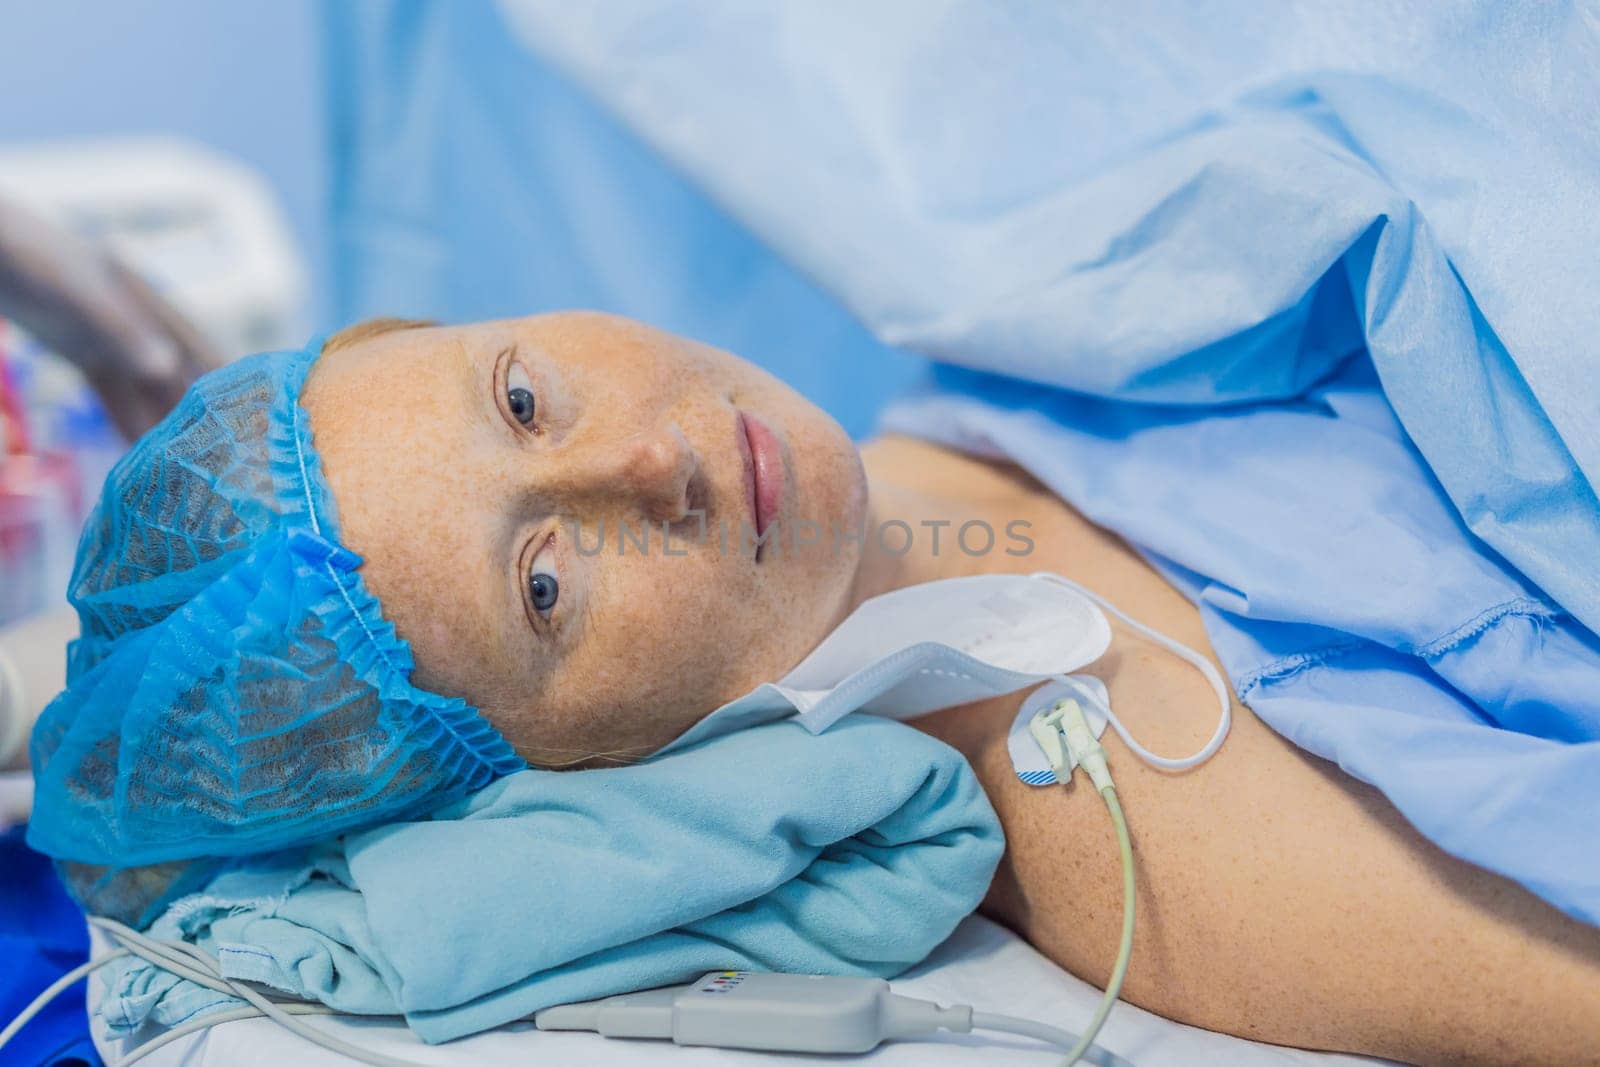 A woman lies in the operating room, ready for surgery. Surrounded by advanced medical equipment and healthcare professionals, she exhibits calmness and trust, highlighting the importance of the procedure.